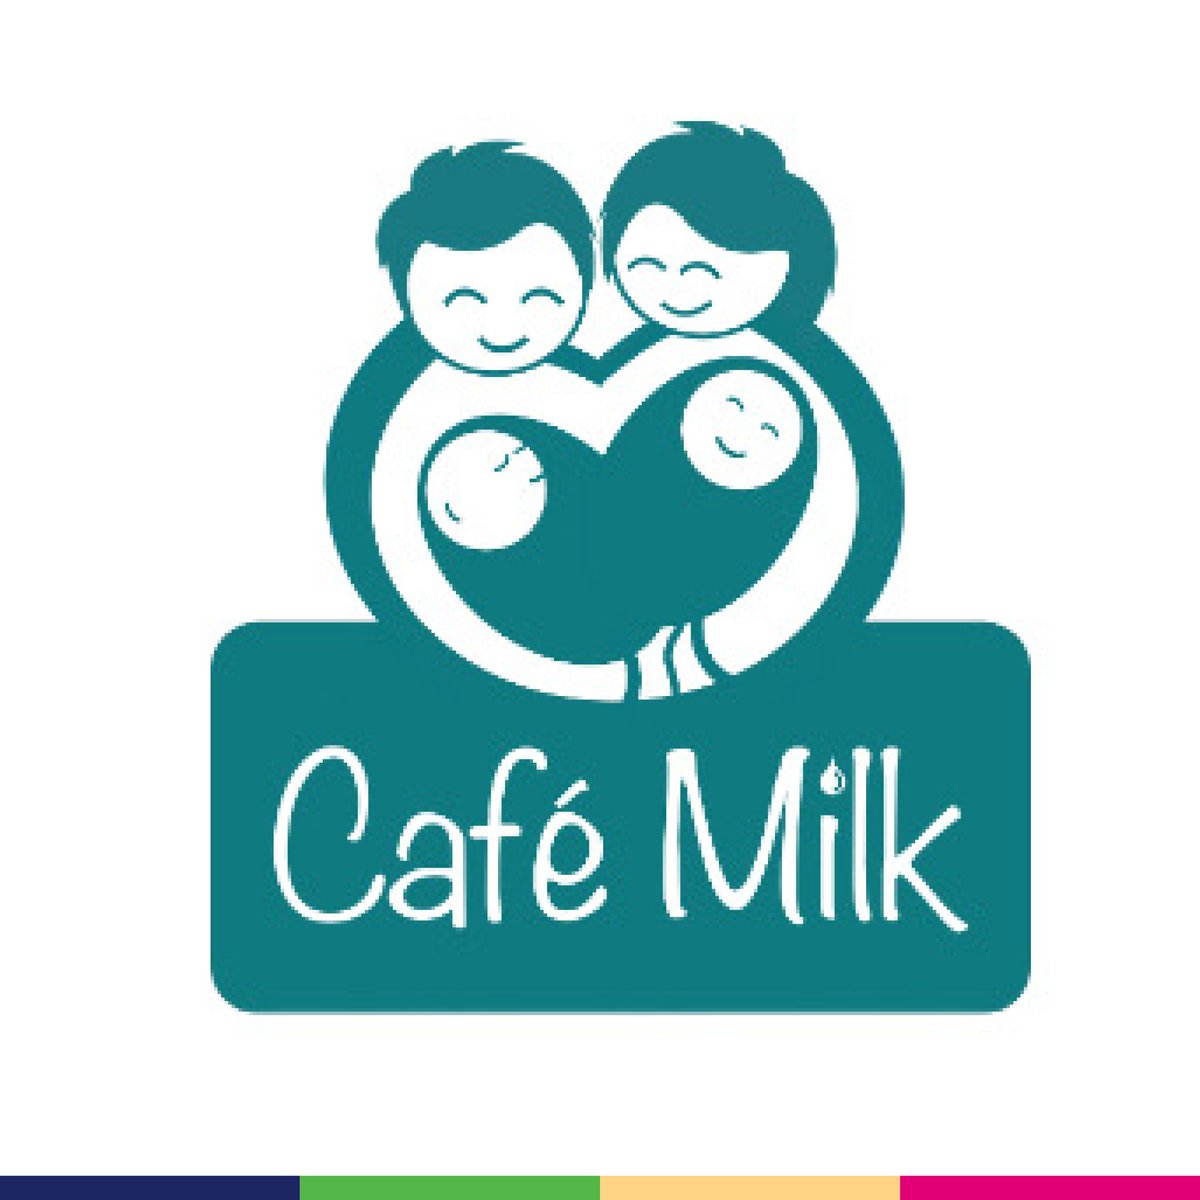 🤰🏻 Are you a new Mum or a Mum-to-be?
Make a date in your diary for Cafe Milk for friendly advice and support.
 Join us on Wednesday 22nd May between 10am and 12pm at the Harlequin Pop Up on the Upper Level of The Belfry.
#Redhill #RH1 #MumToBe #BelfryRedhill #NewMum #SurreyBaby